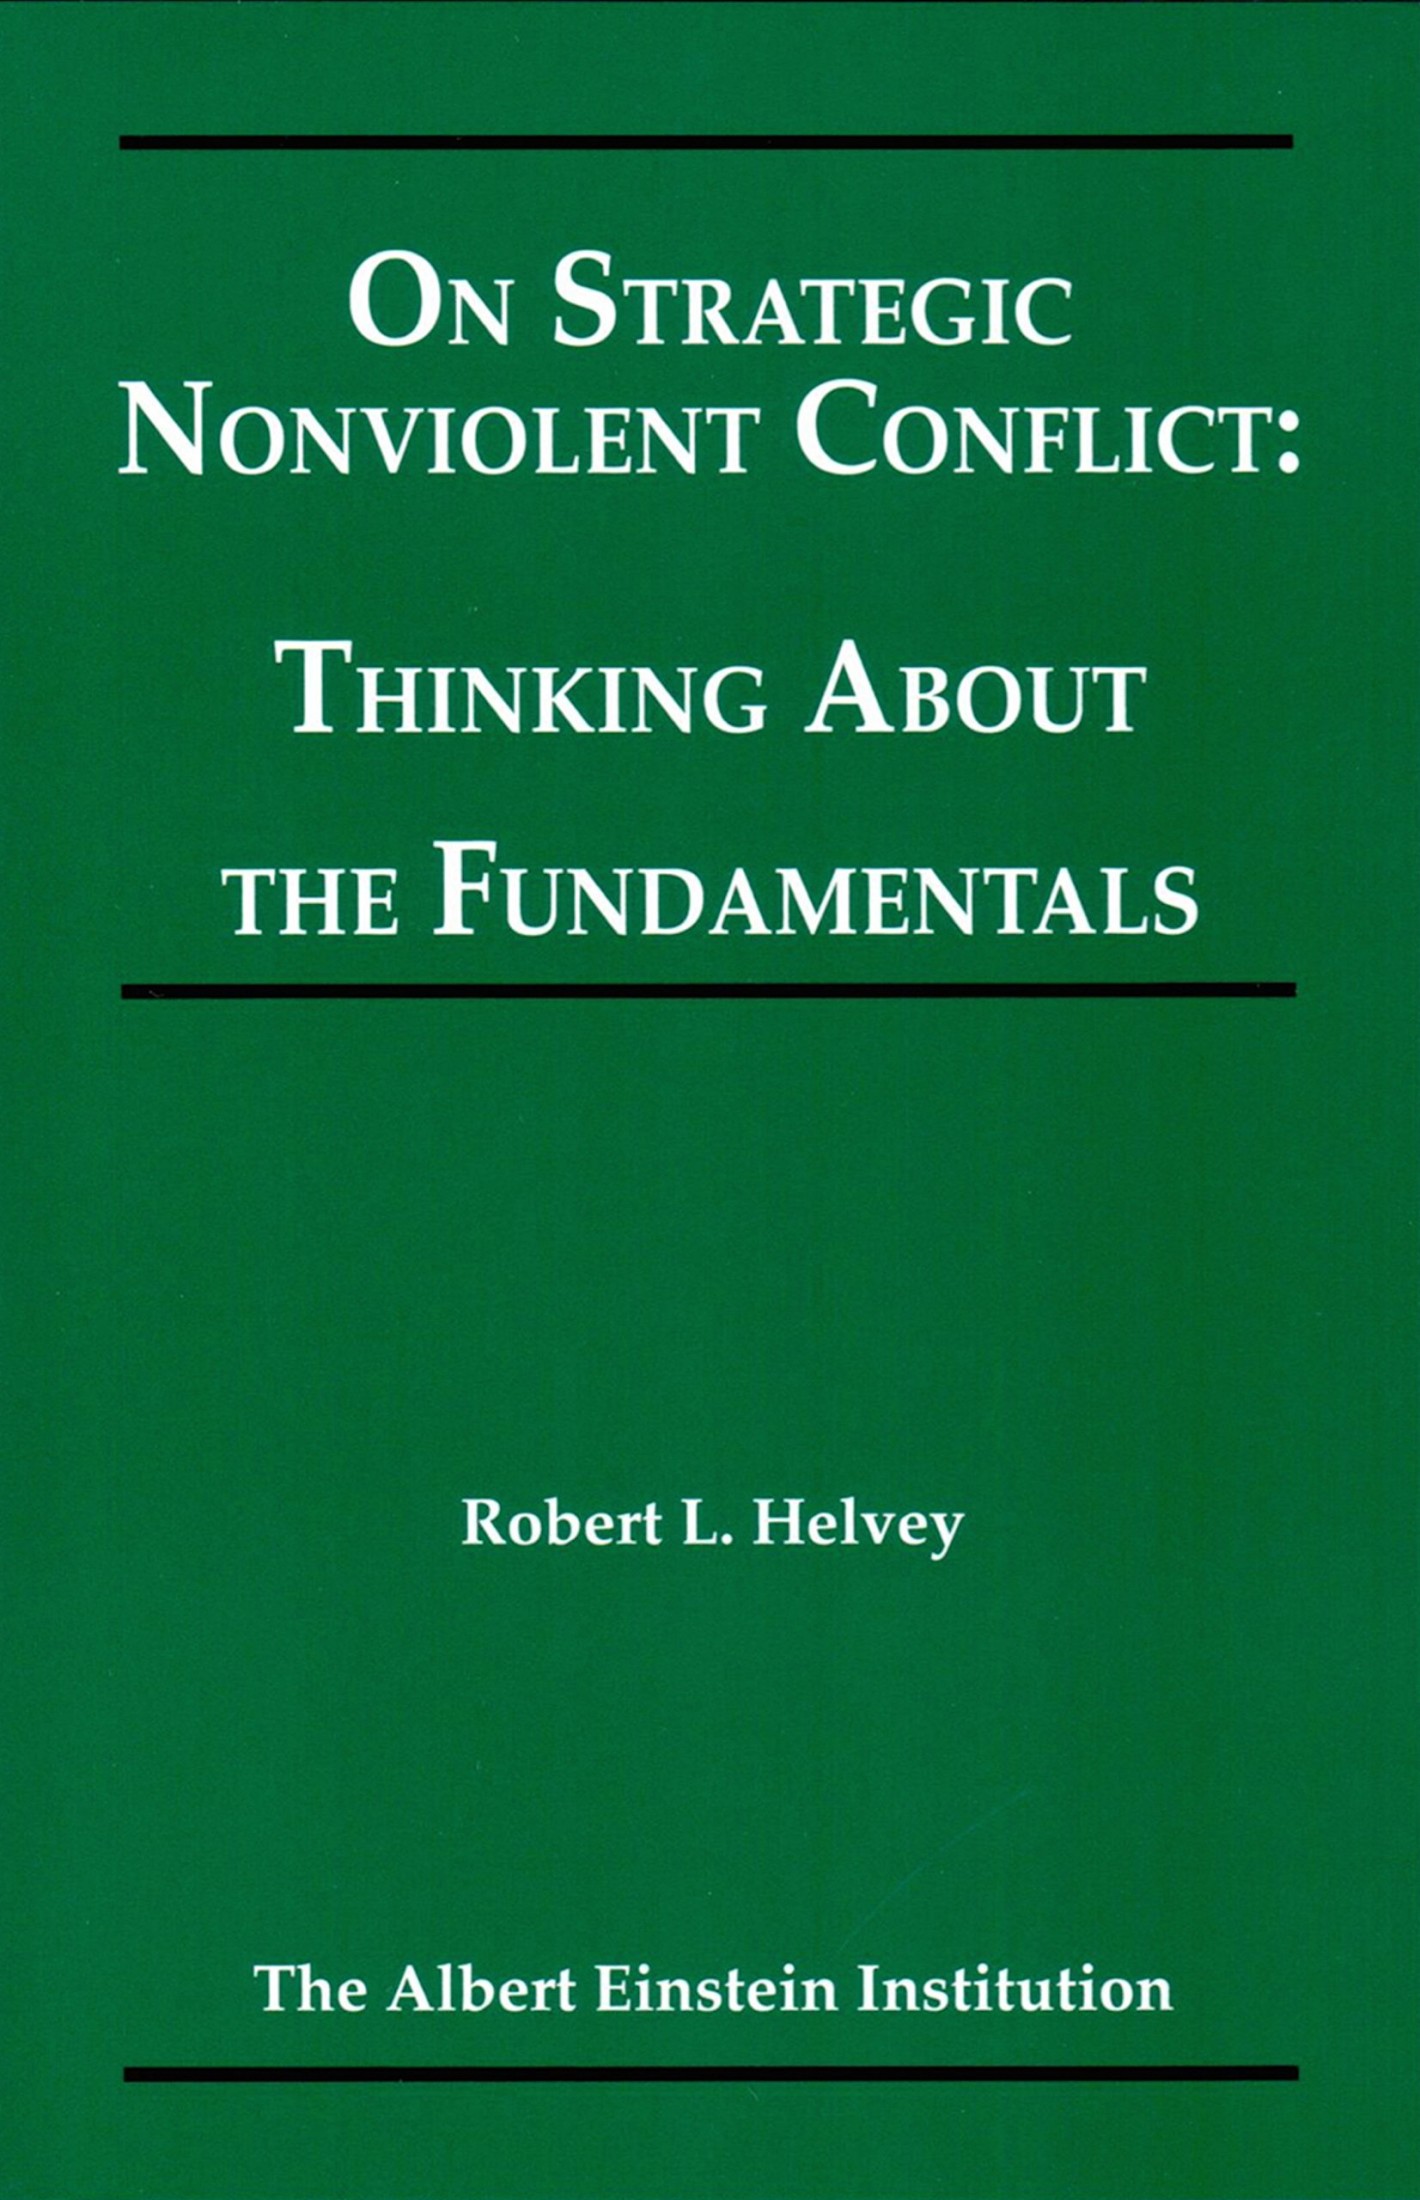 On Strategic Nonviolent Conflict (2004) by Robert Helvey